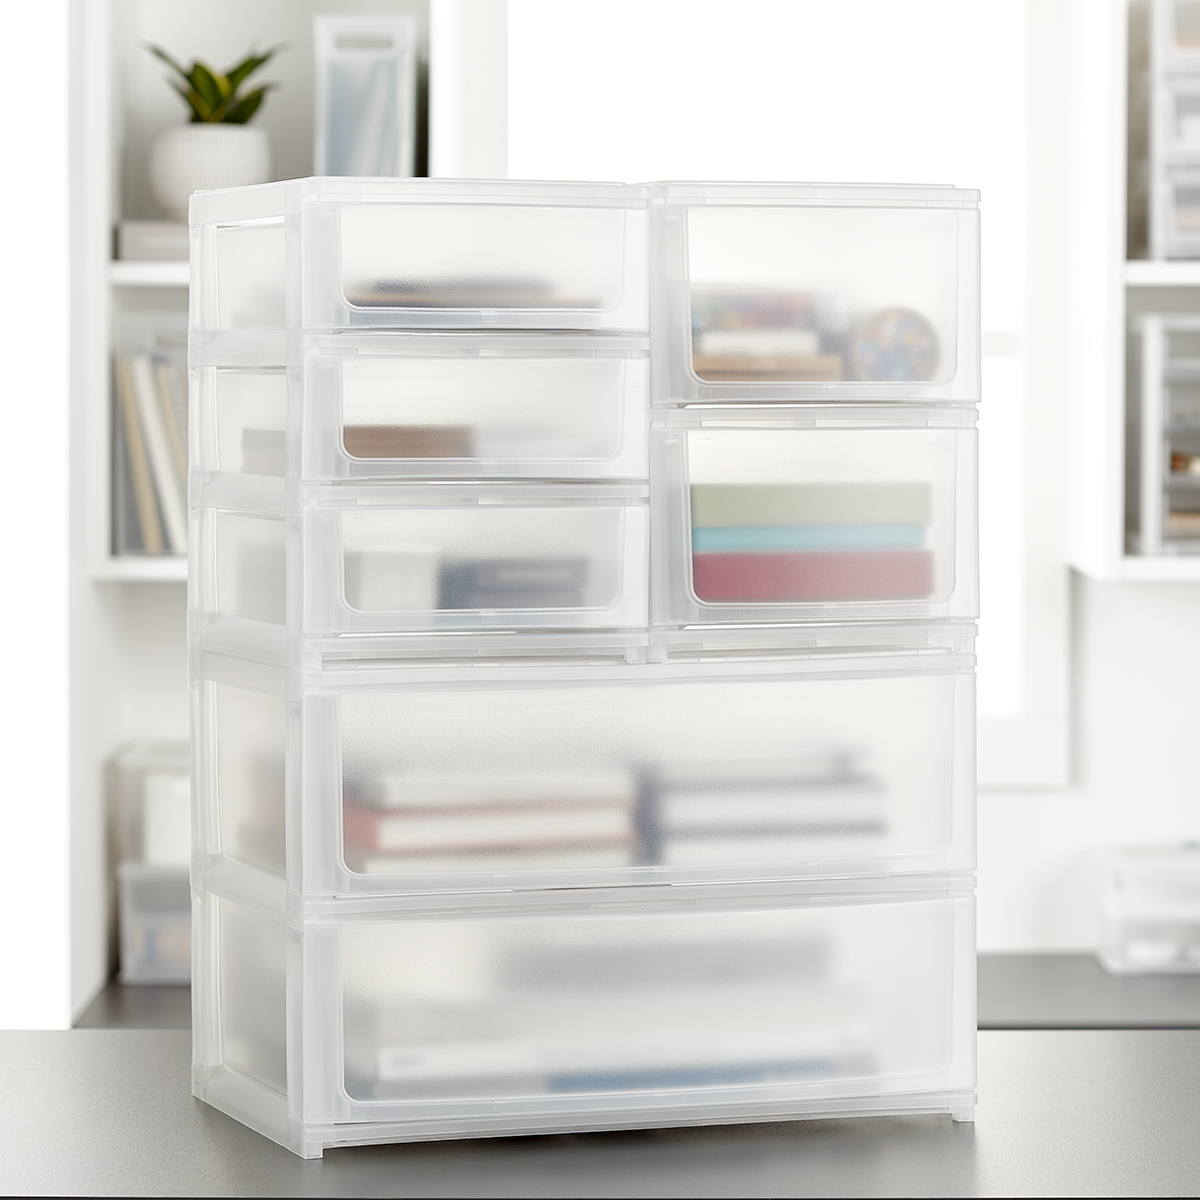 Shimo Stacking Organizers with Drawers